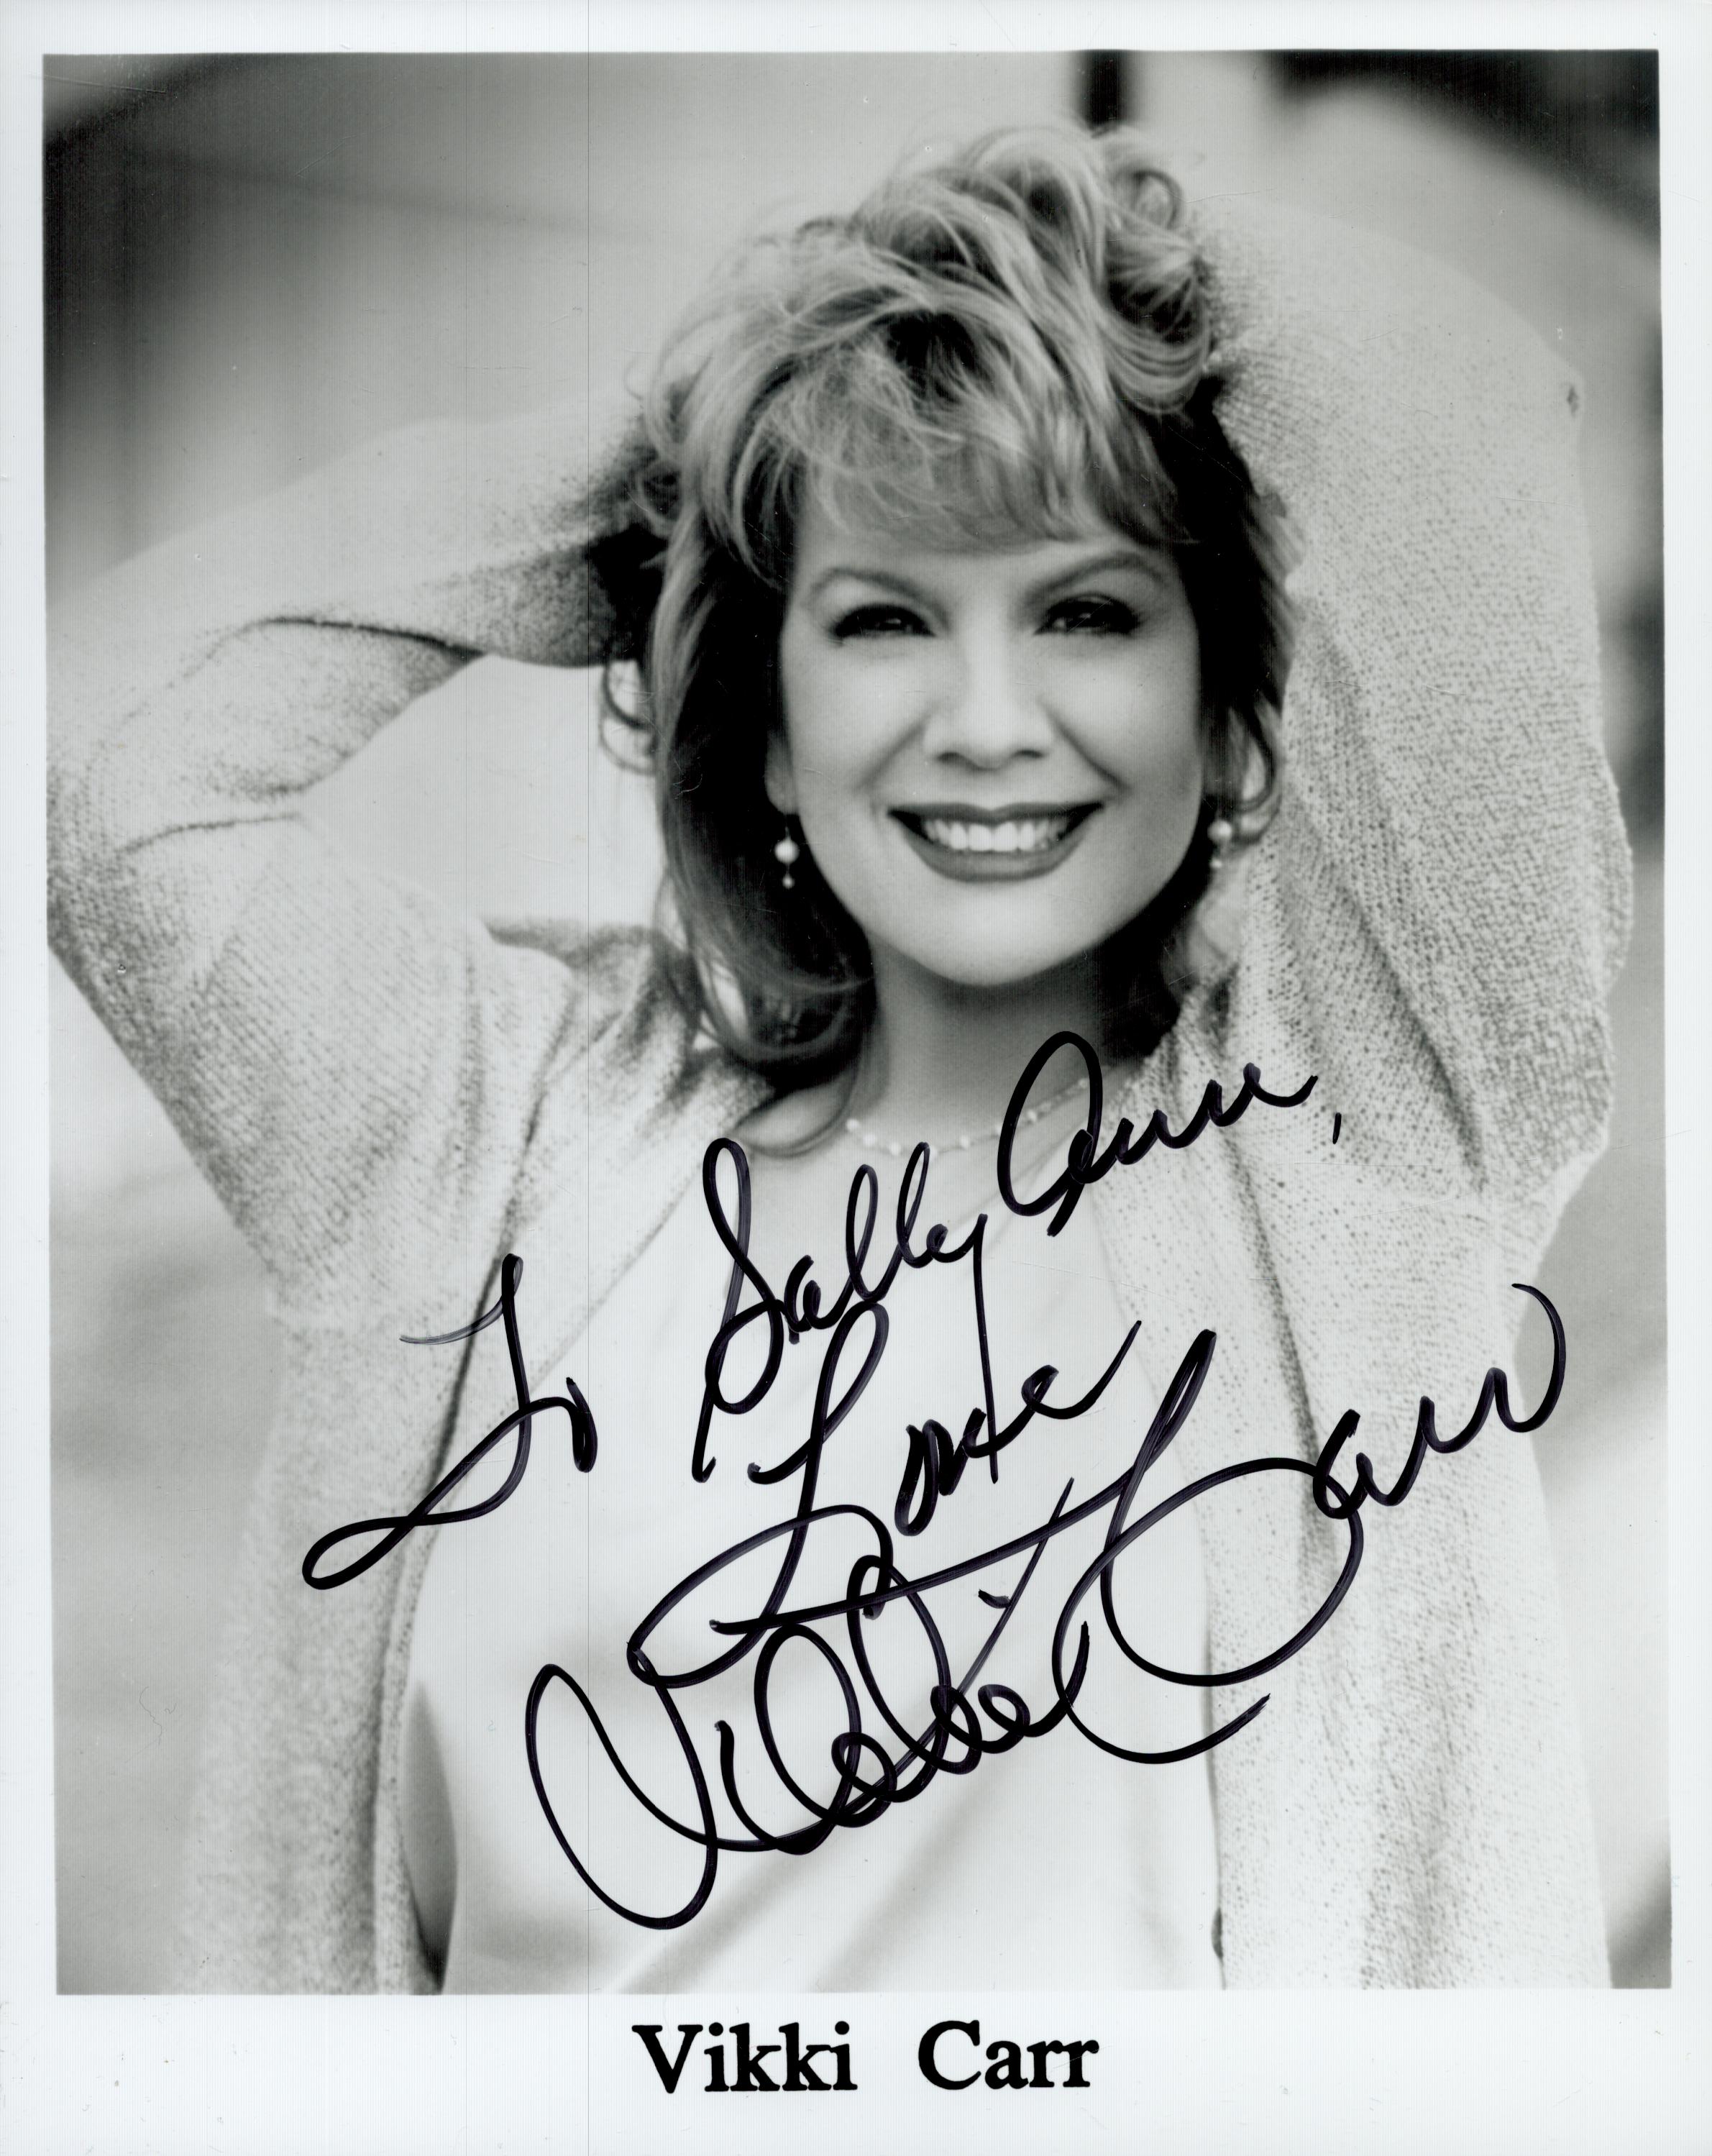 Vikki Carr signed 10x8 inch black and white promo photo. Dedicated. Good Condition. All autographs